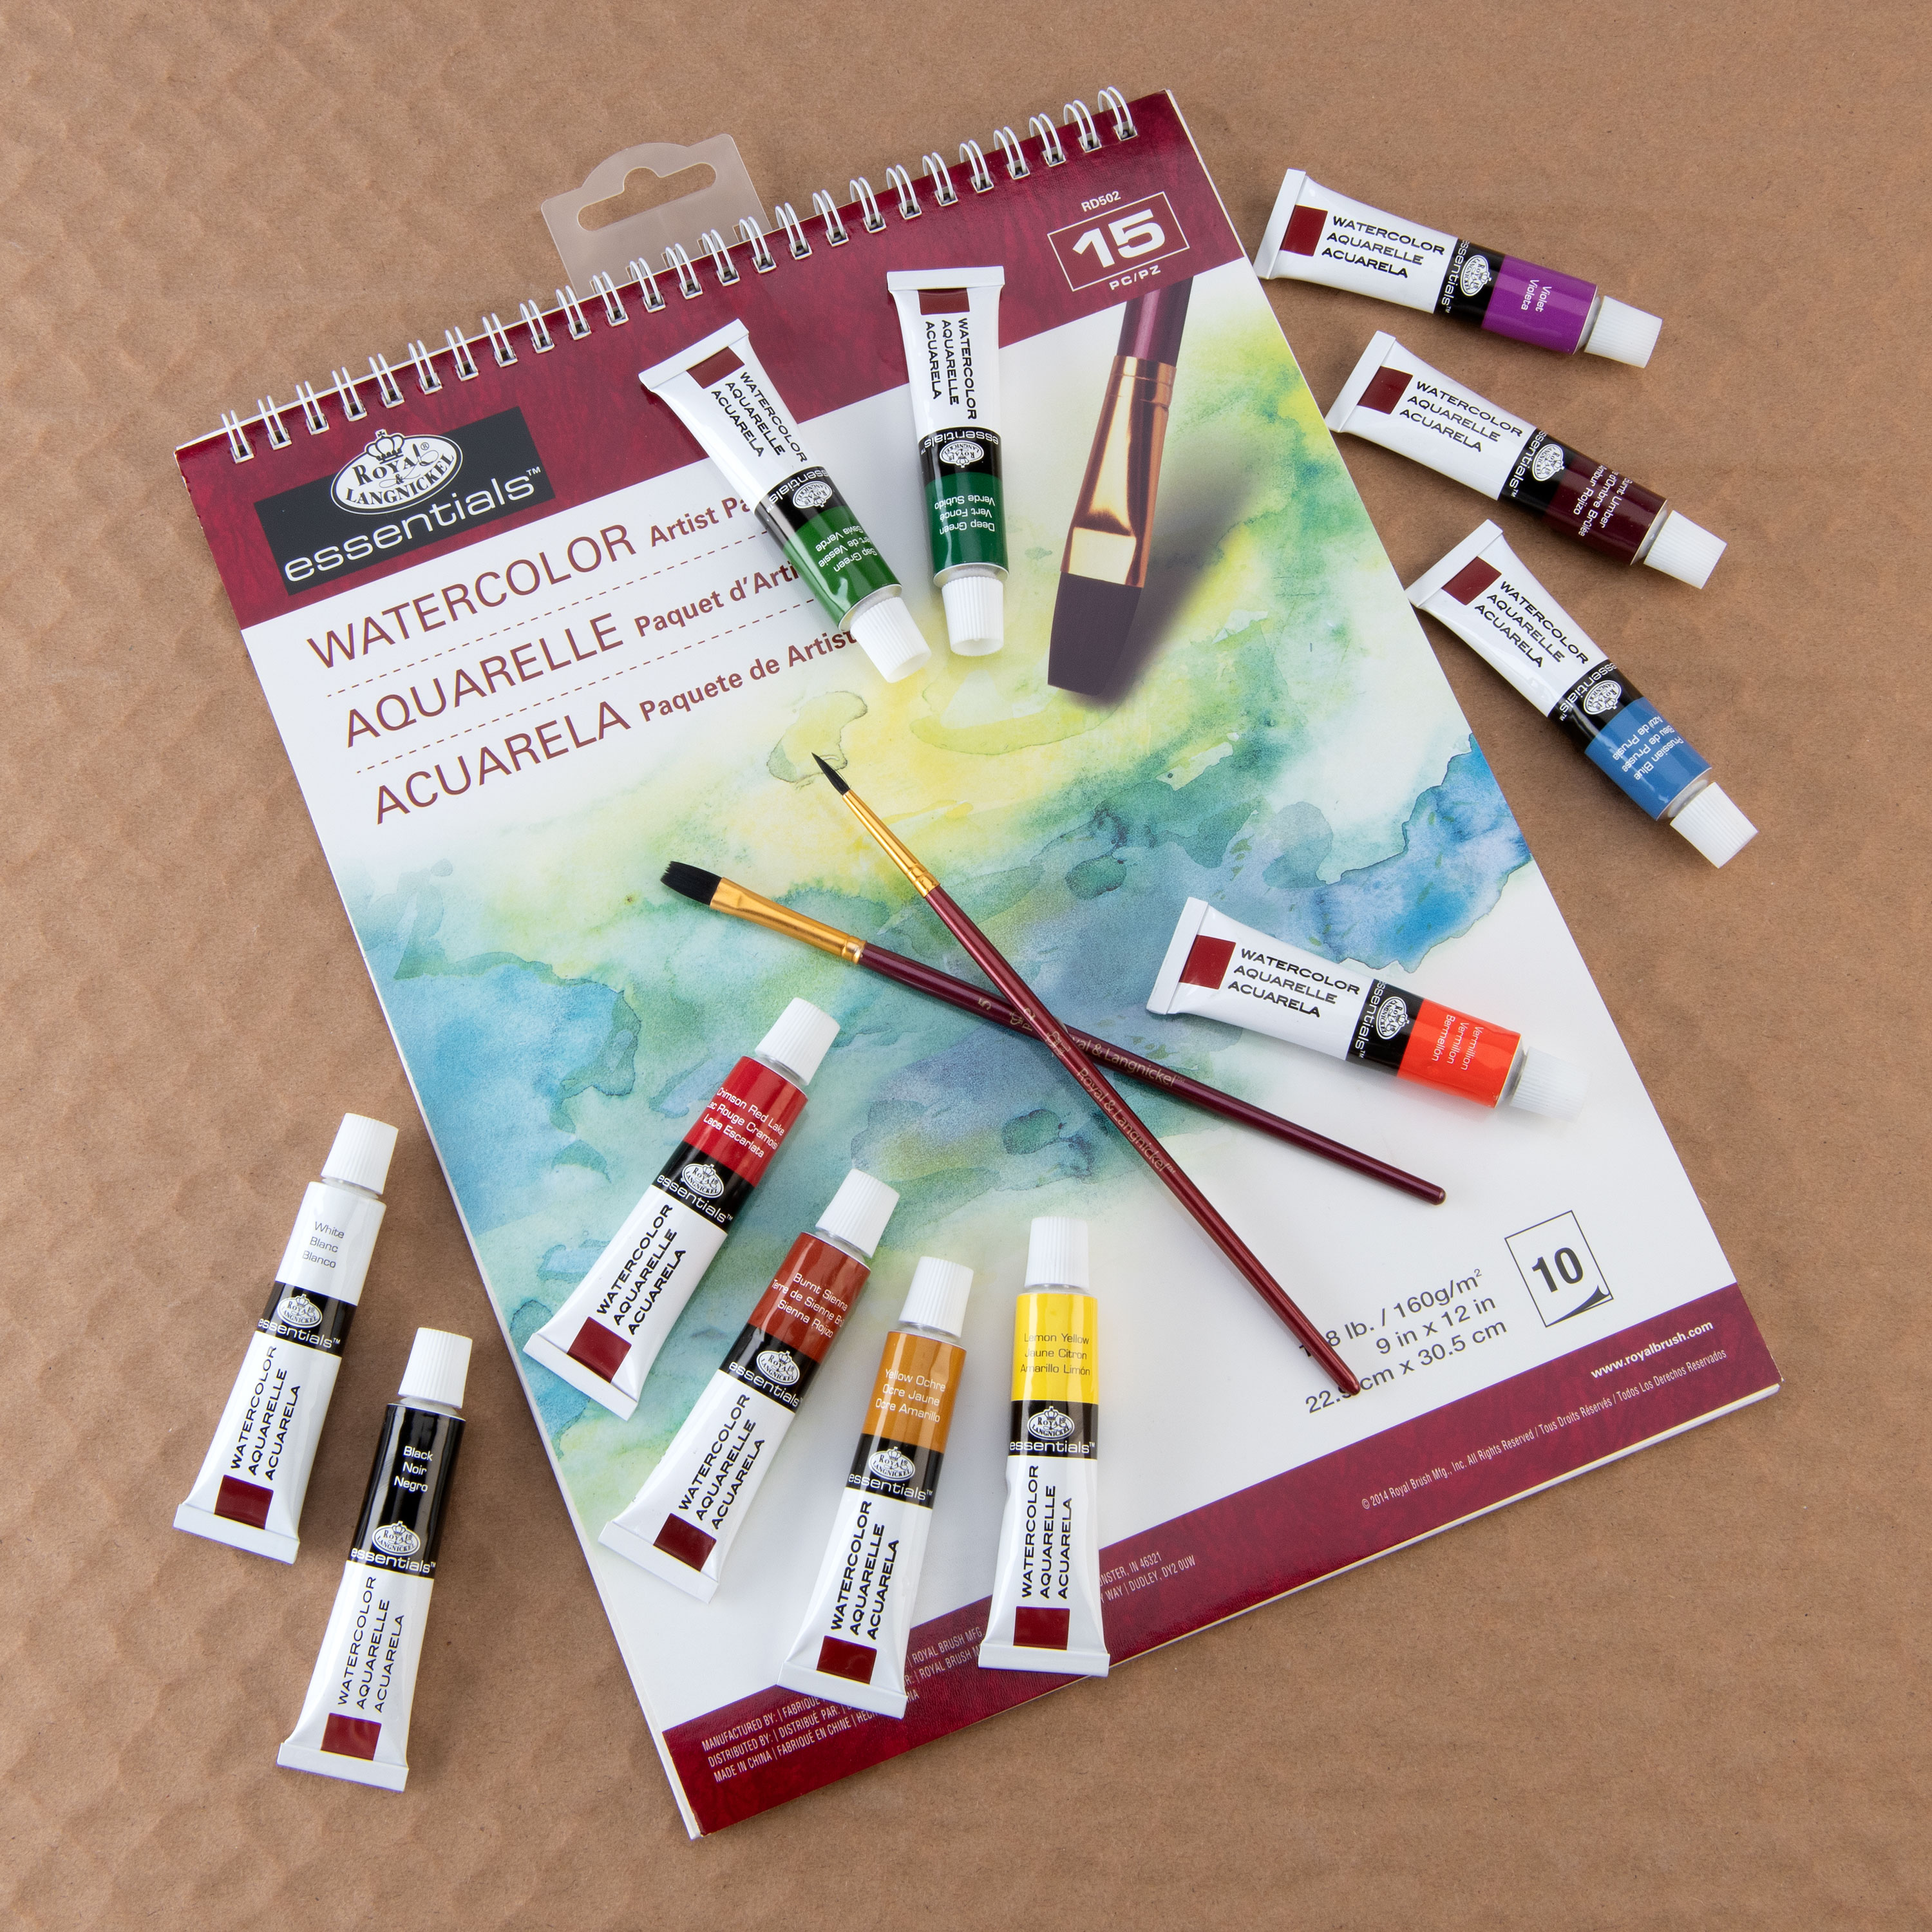 Royal & Langnickel Essentials Watercolor Painting Art Set, for Kids and Adults, 15pc - image 5 of 8